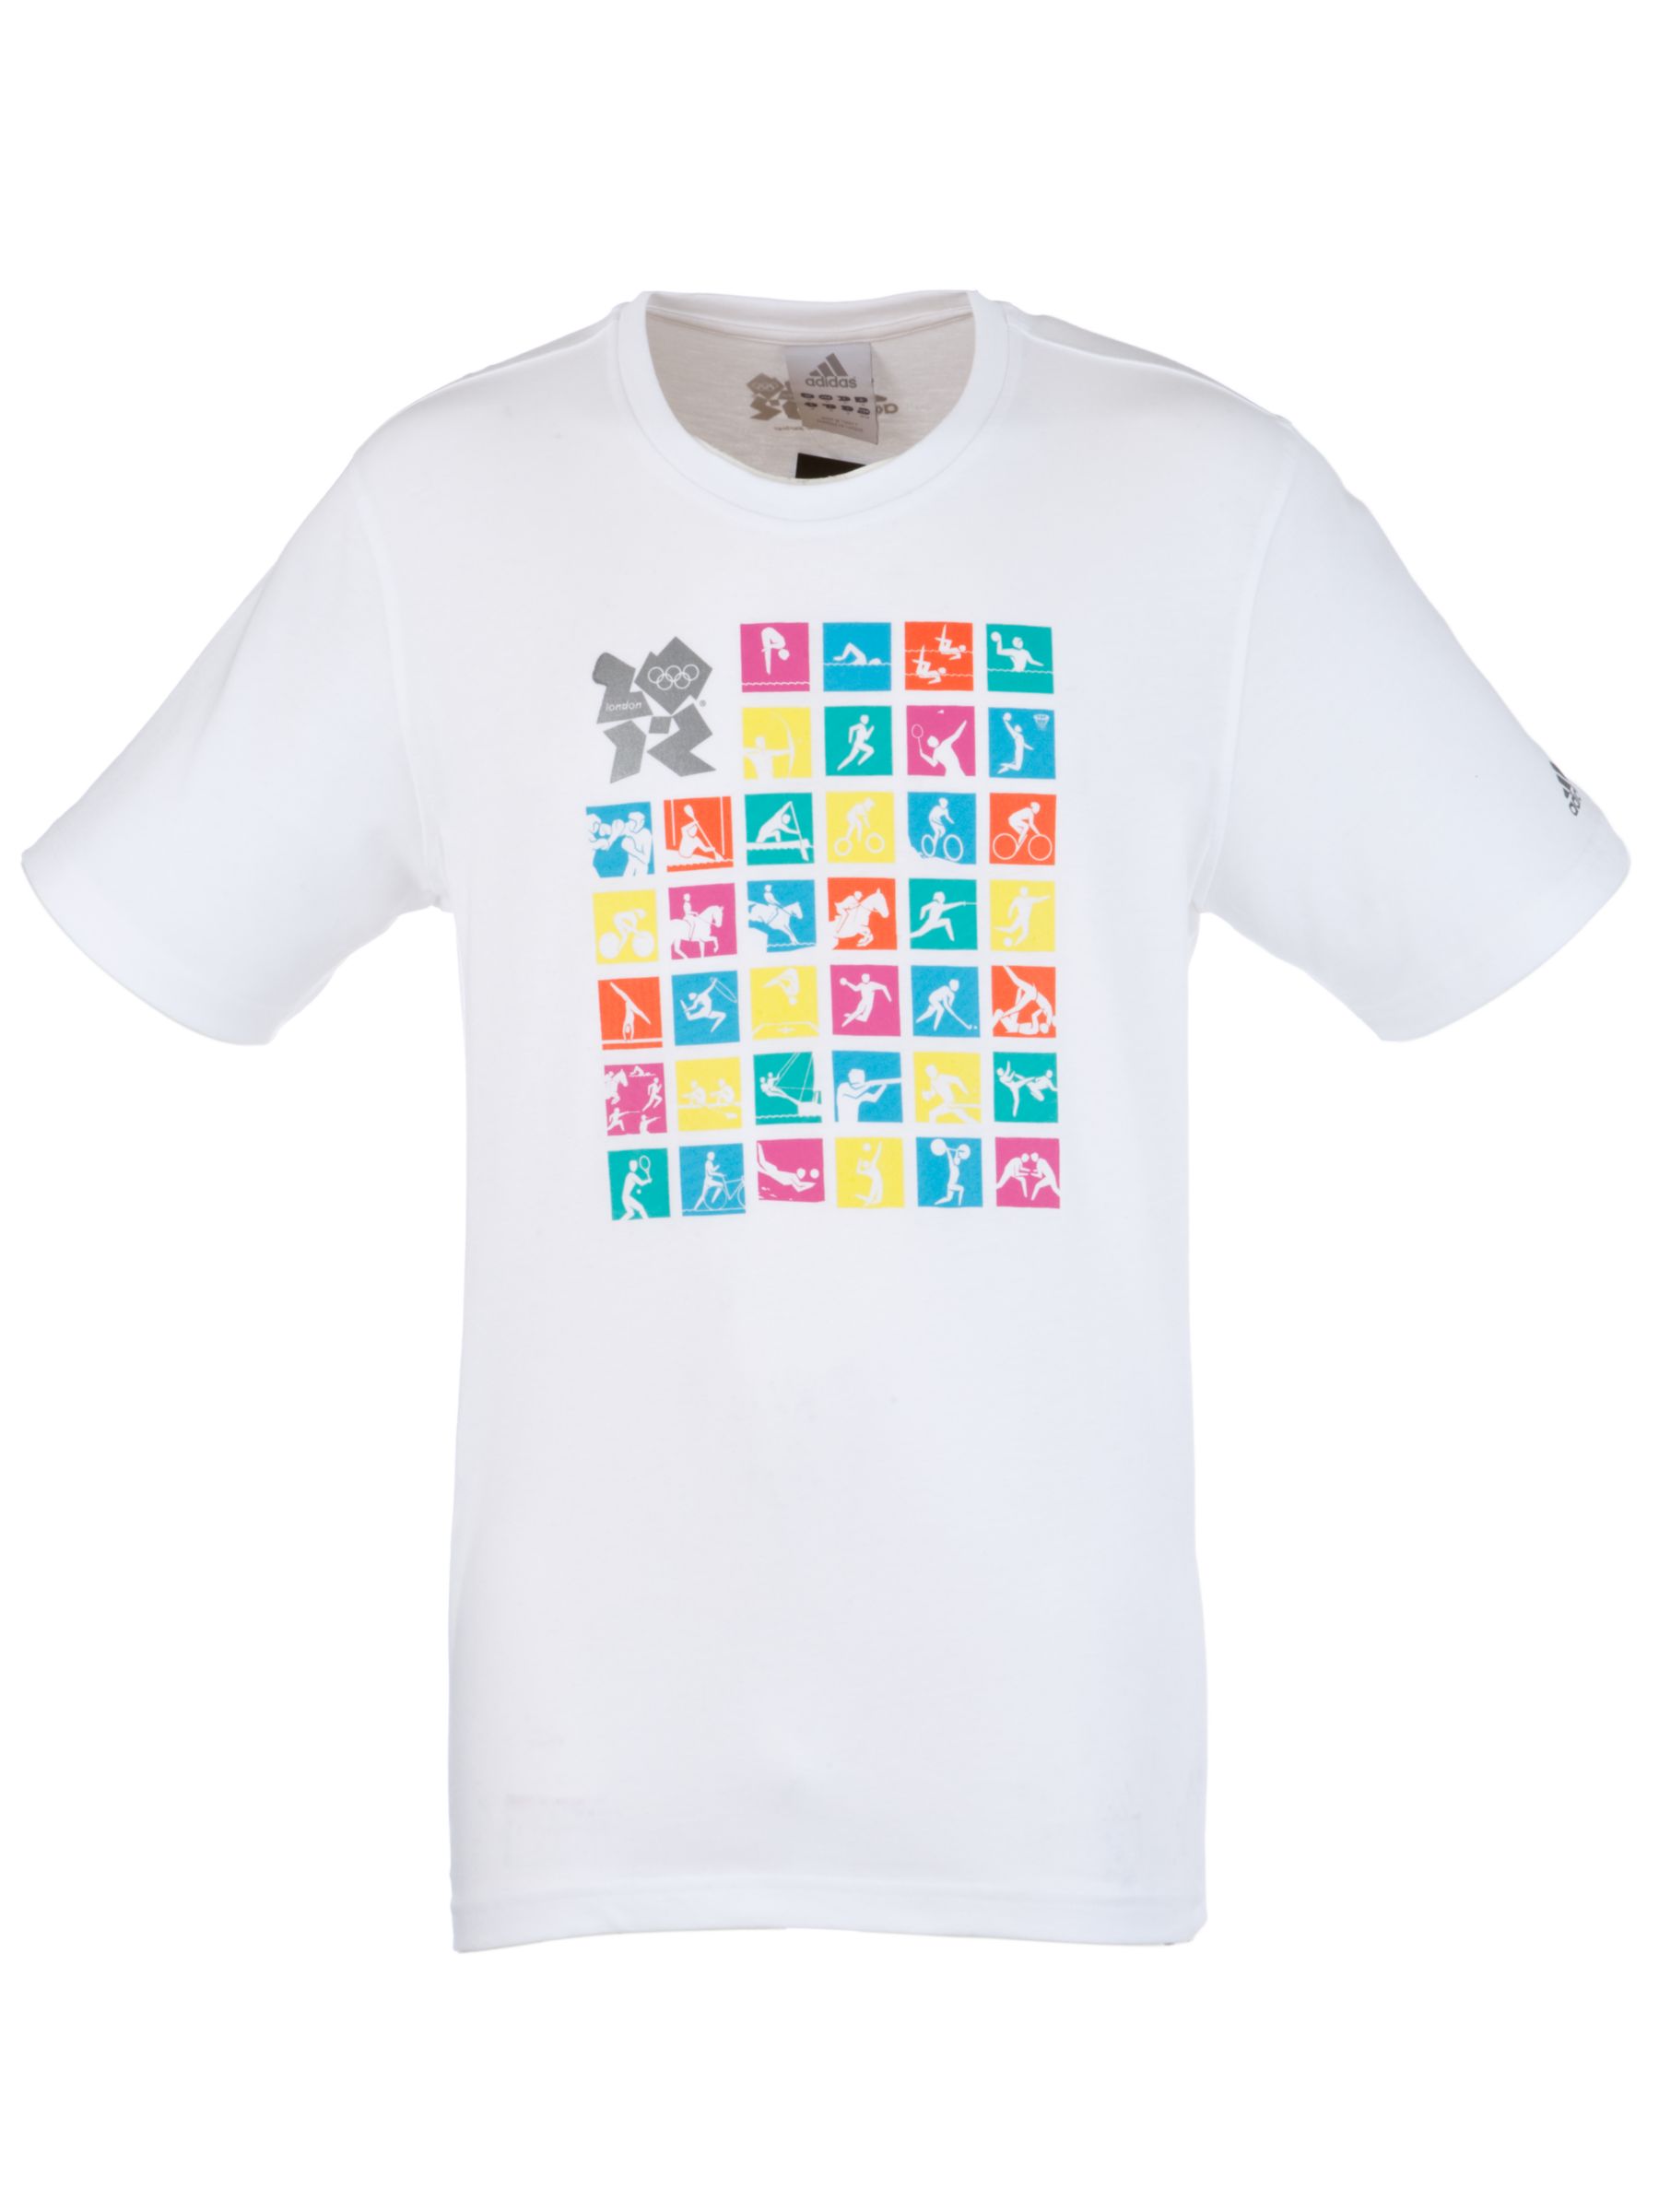 Adidas Olympic Games 2012 Pictograms T-Shirt,